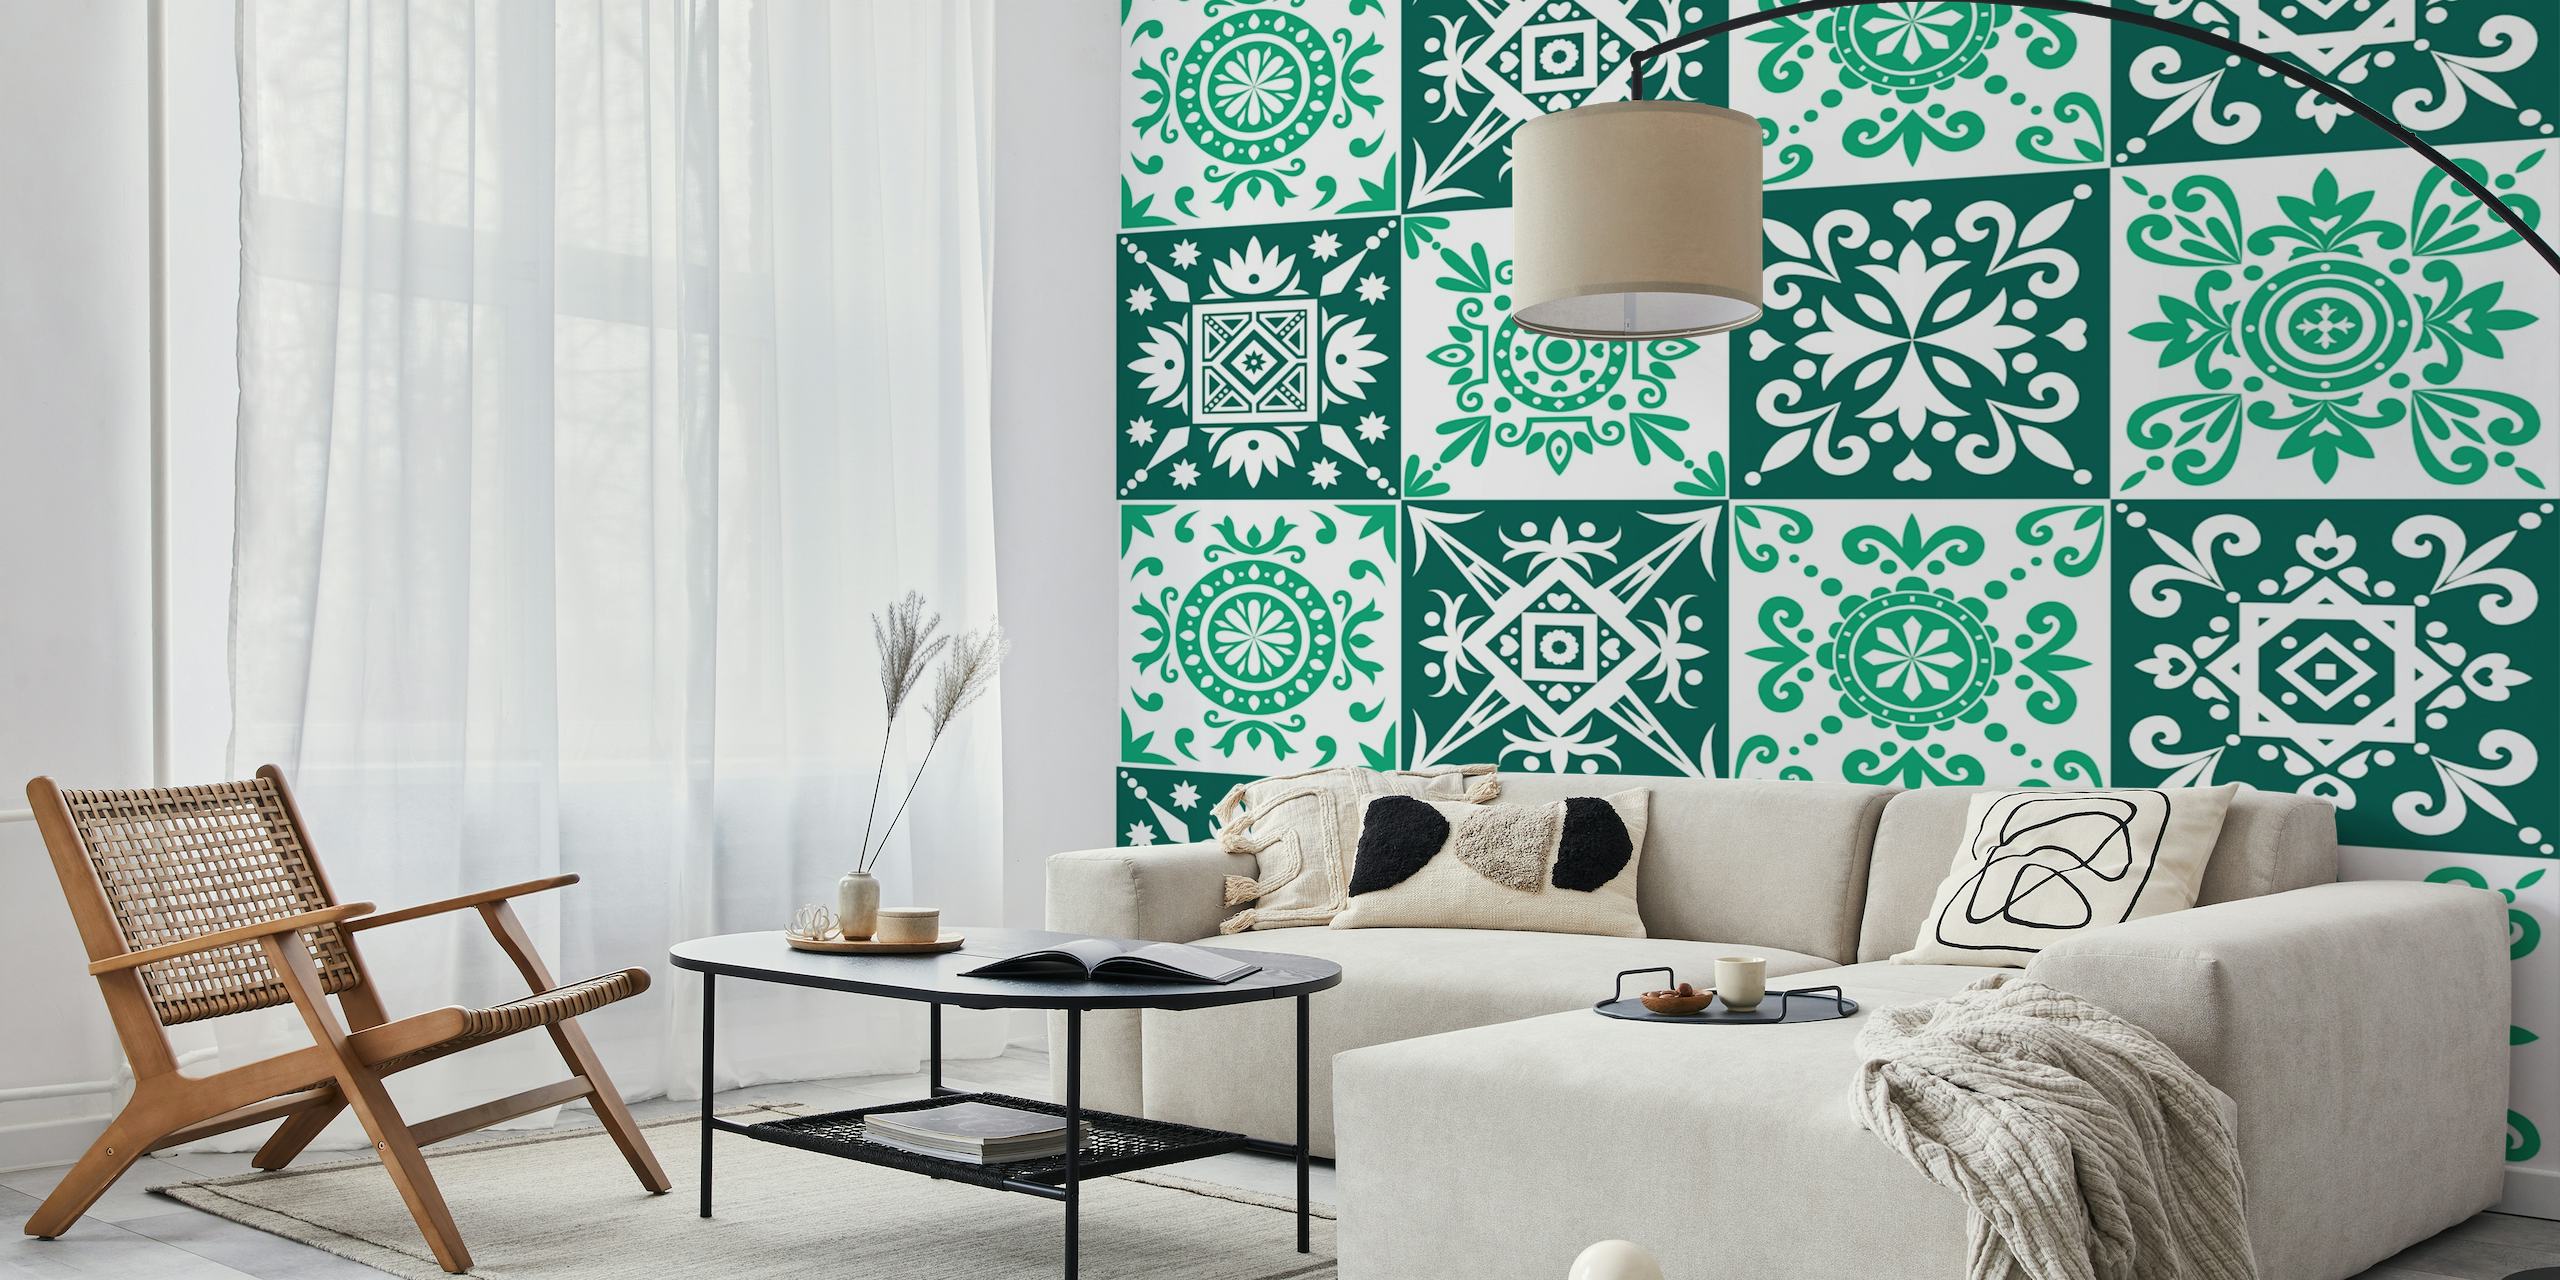 Spanish tile in jungle and emerald tapet